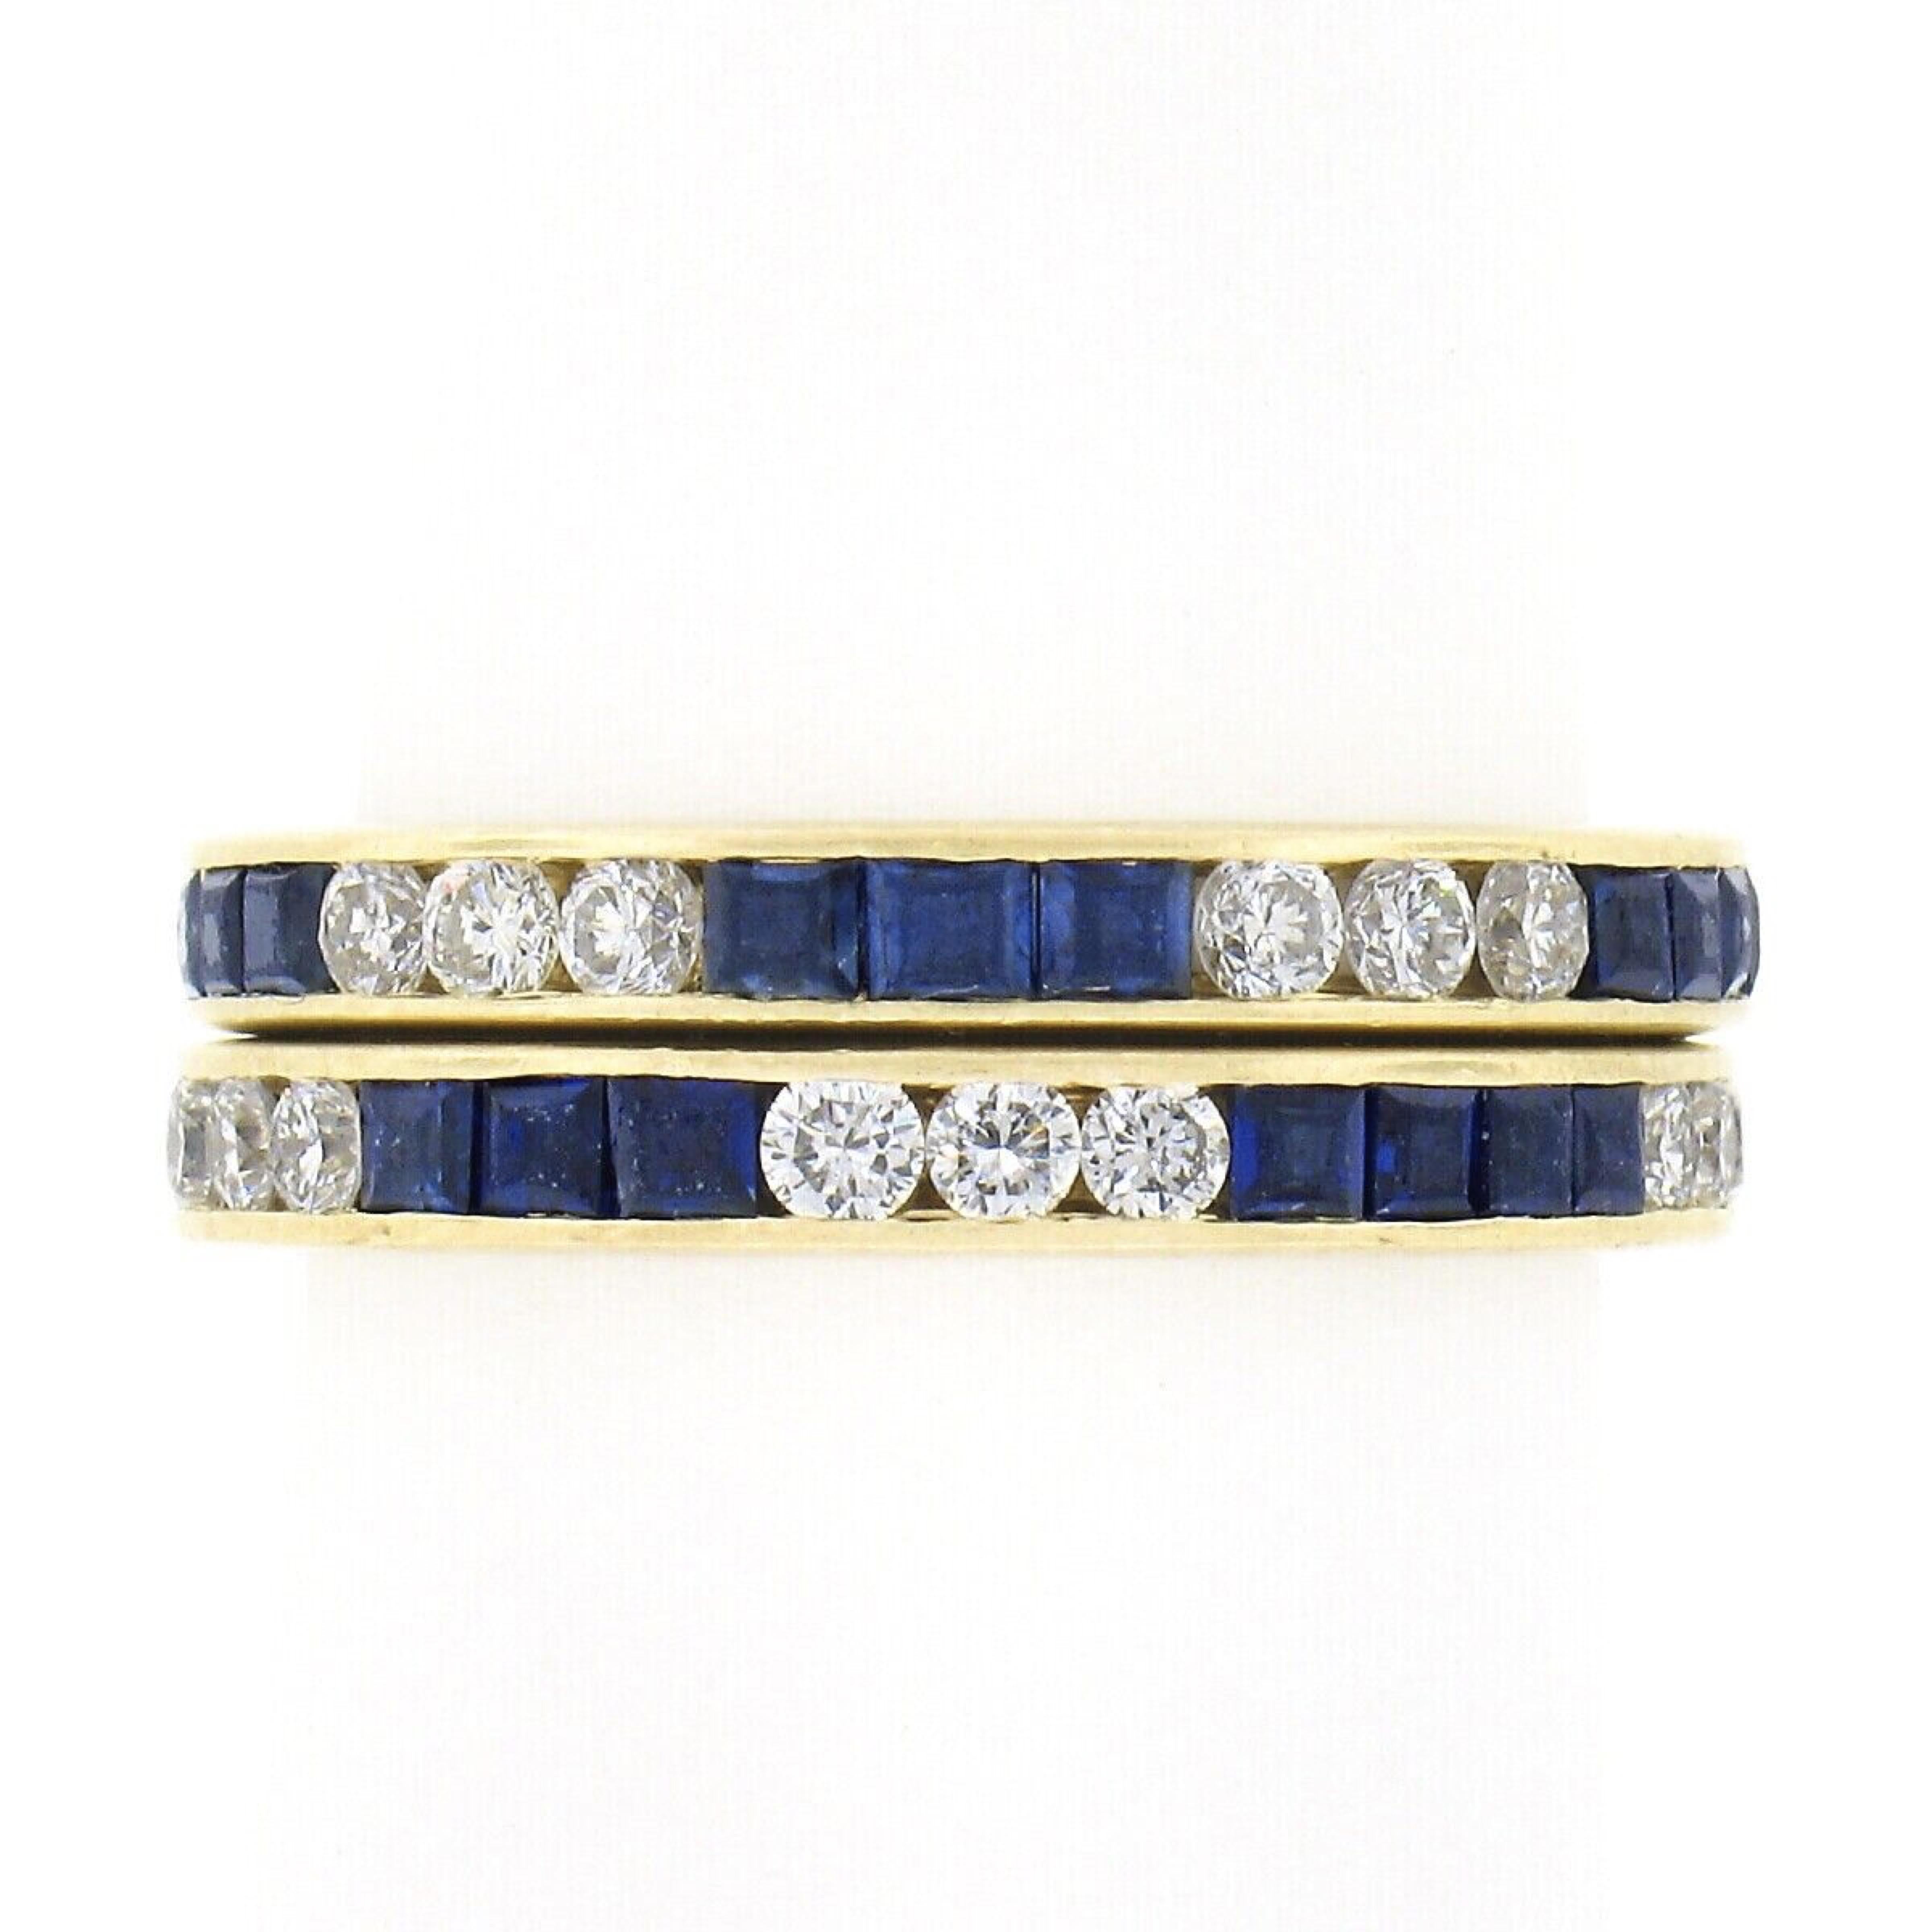 Here we have two beautiful, stackable, vintage bands crafted in solid 18k yellow gold that together feature approximately 2.20 carats of fine quality sapphires and diamonds throughout. These eternity style rings elegantly carry groups of square step